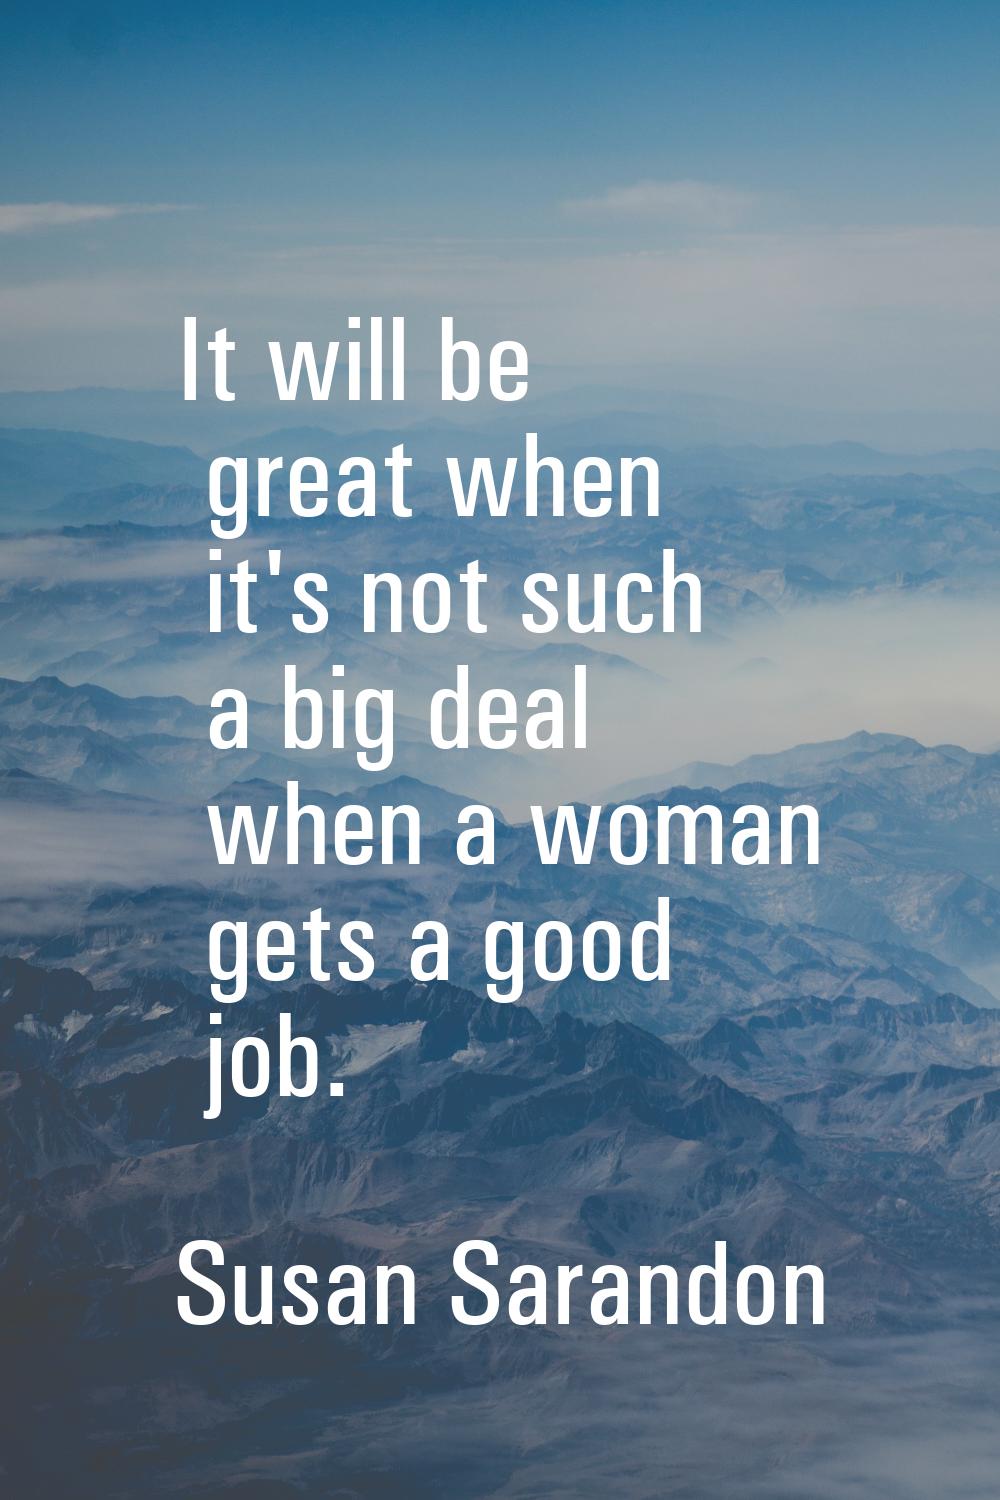 It will be great when it's not such a big deal when a woman gets a good job.